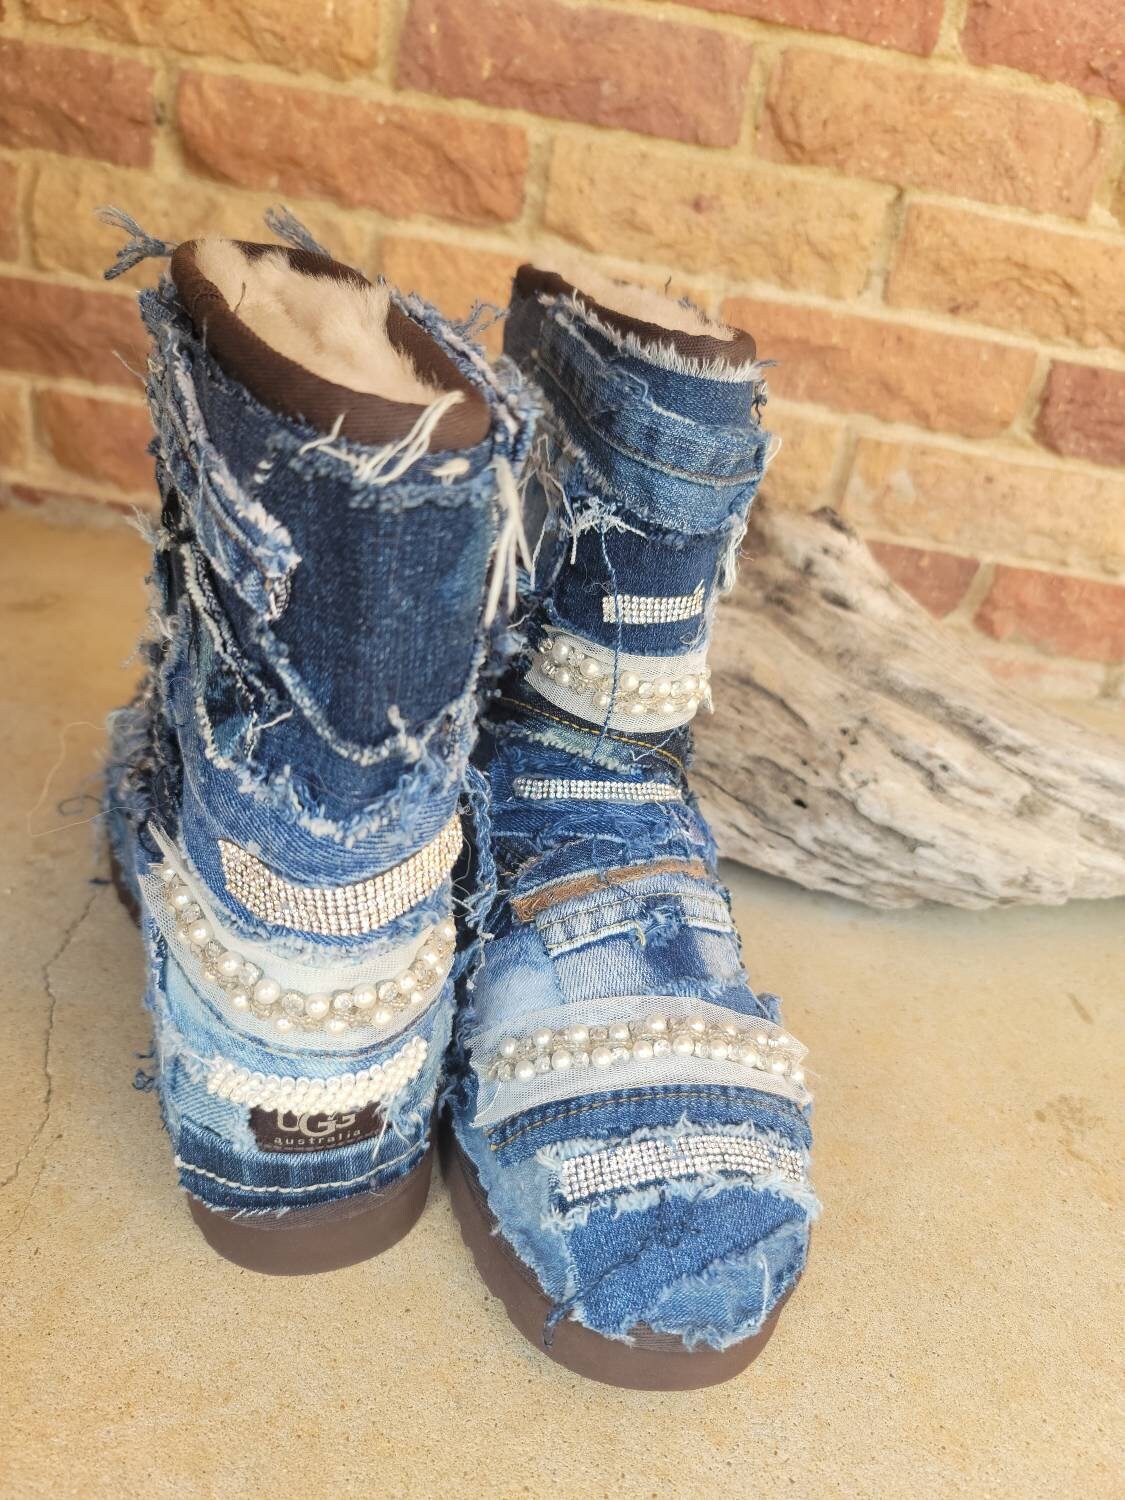 DIY CUSTOM DEMIN GLITTER UGG BOOTS UNDER $25!!! - Up Cycle Your Old Uggs! 